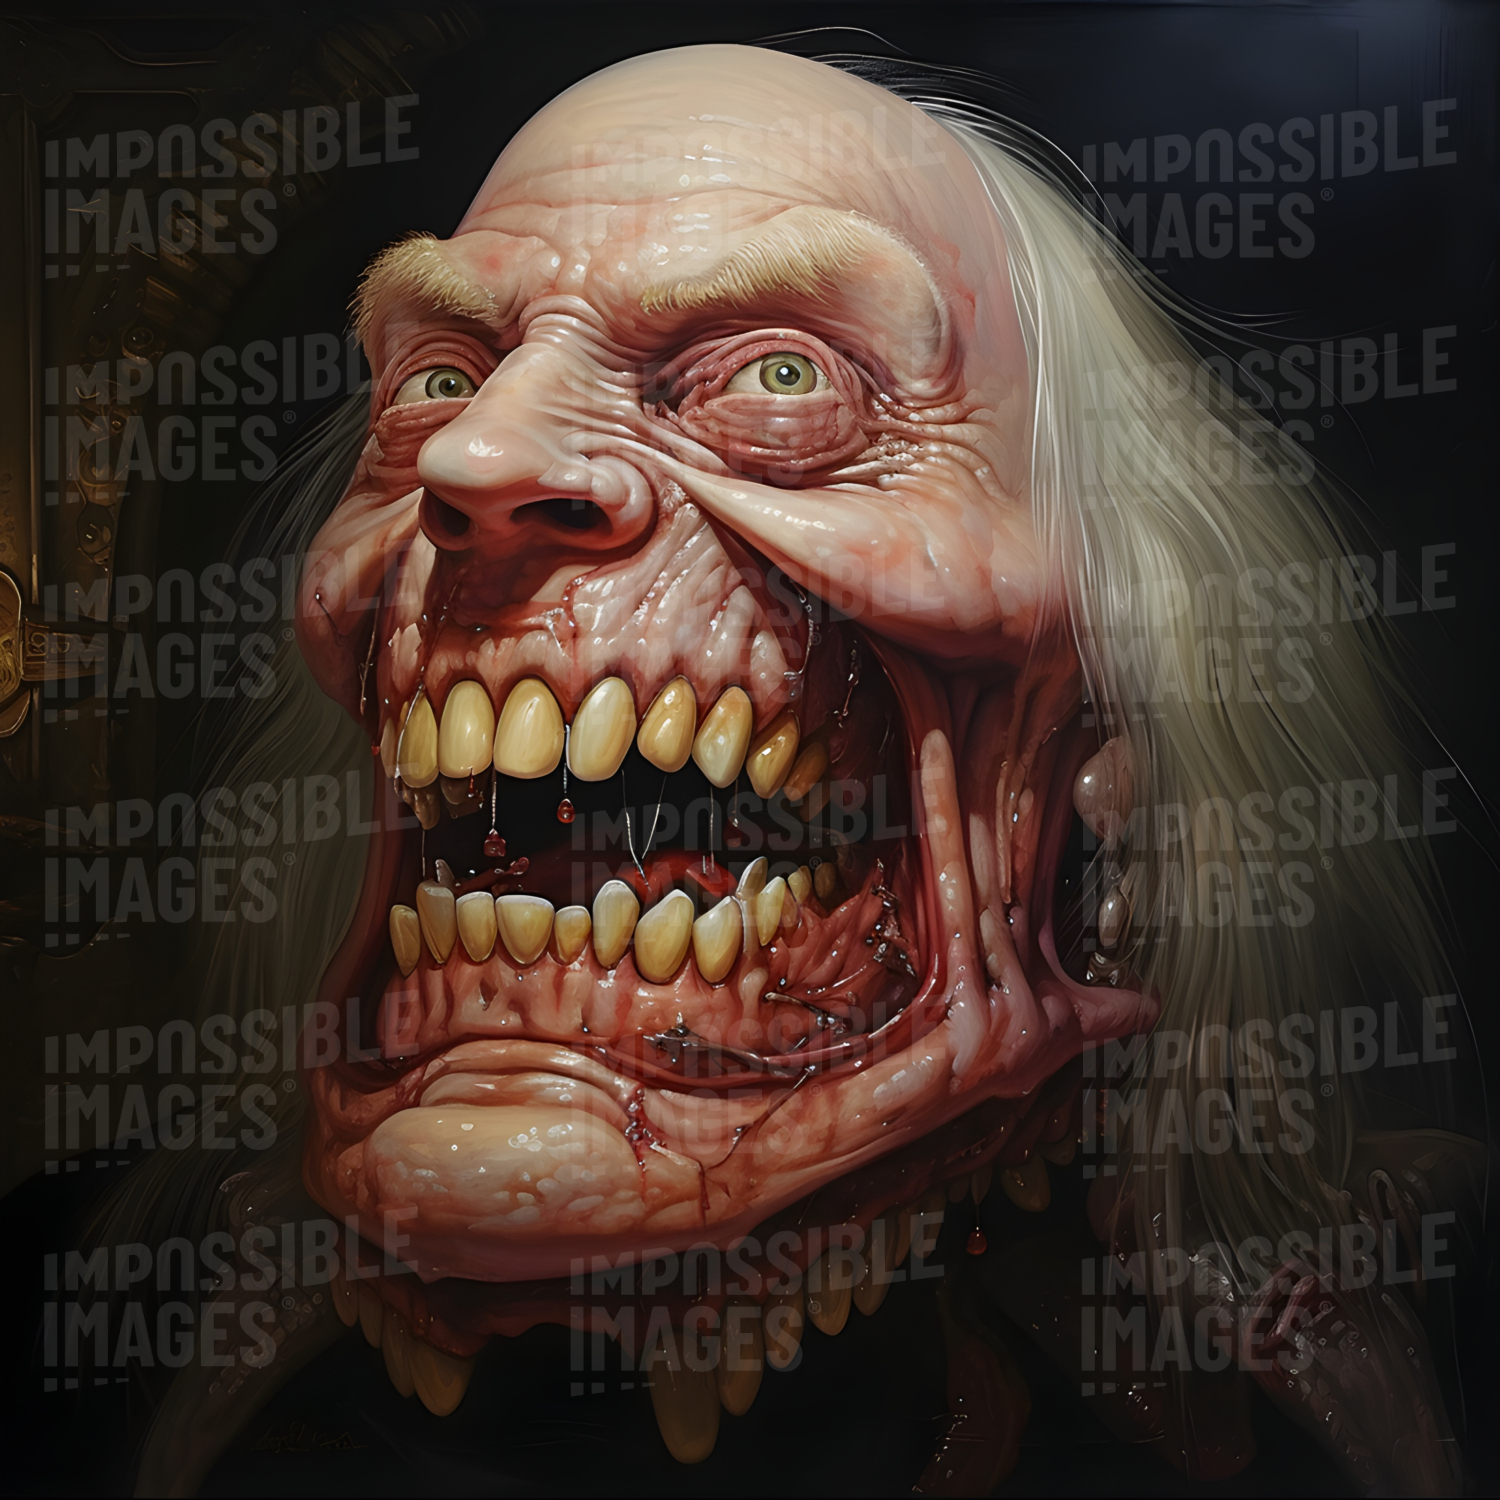 Horrific portrait of a nightmarish man with a grinning mouth full of large sharp teeth